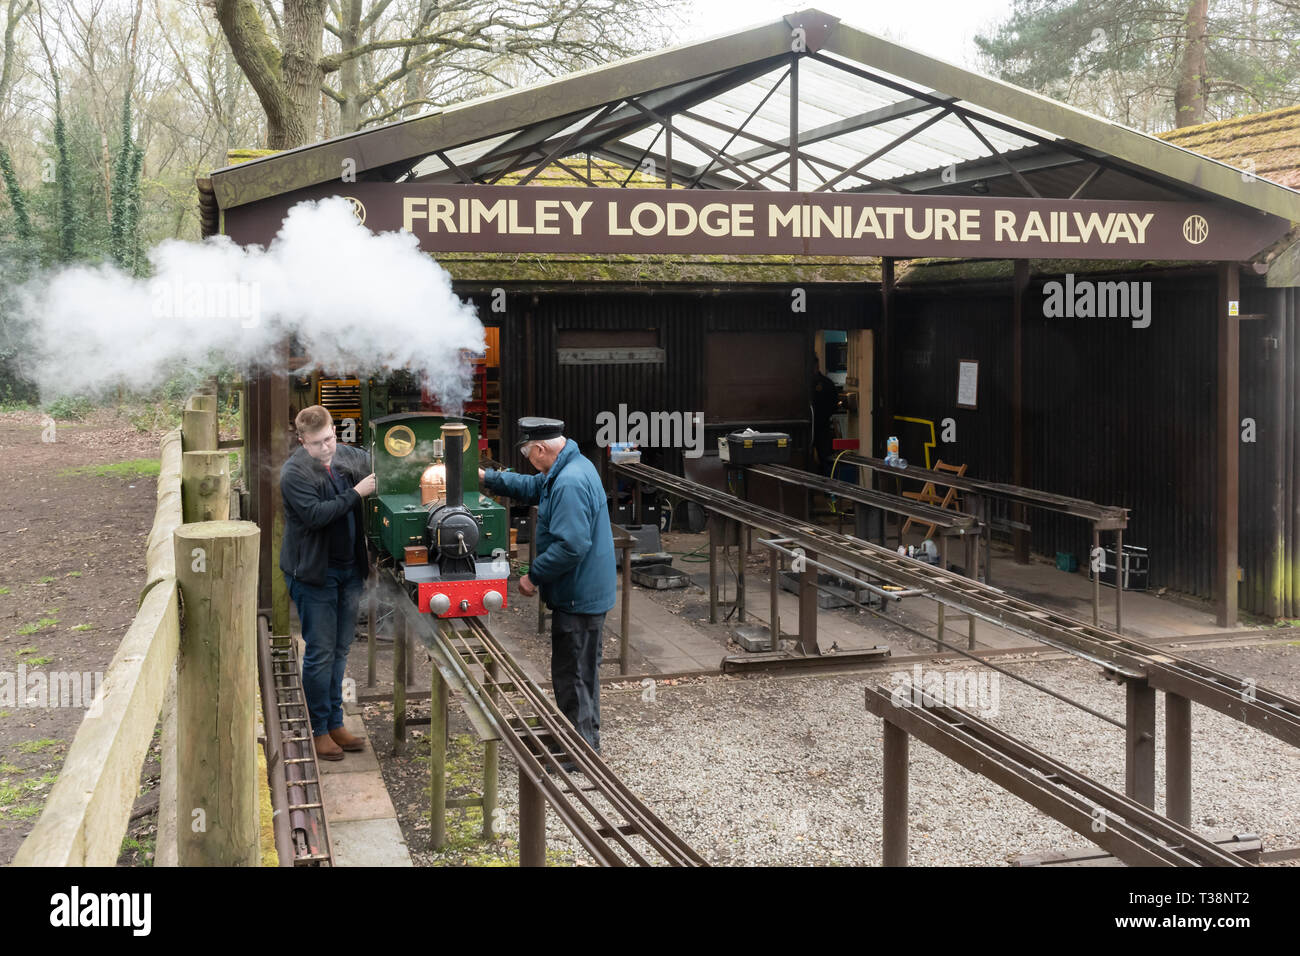 Miniature steam train and railway at Frimley Lodge Park, Frimley, Surrey, UK Stock Photo